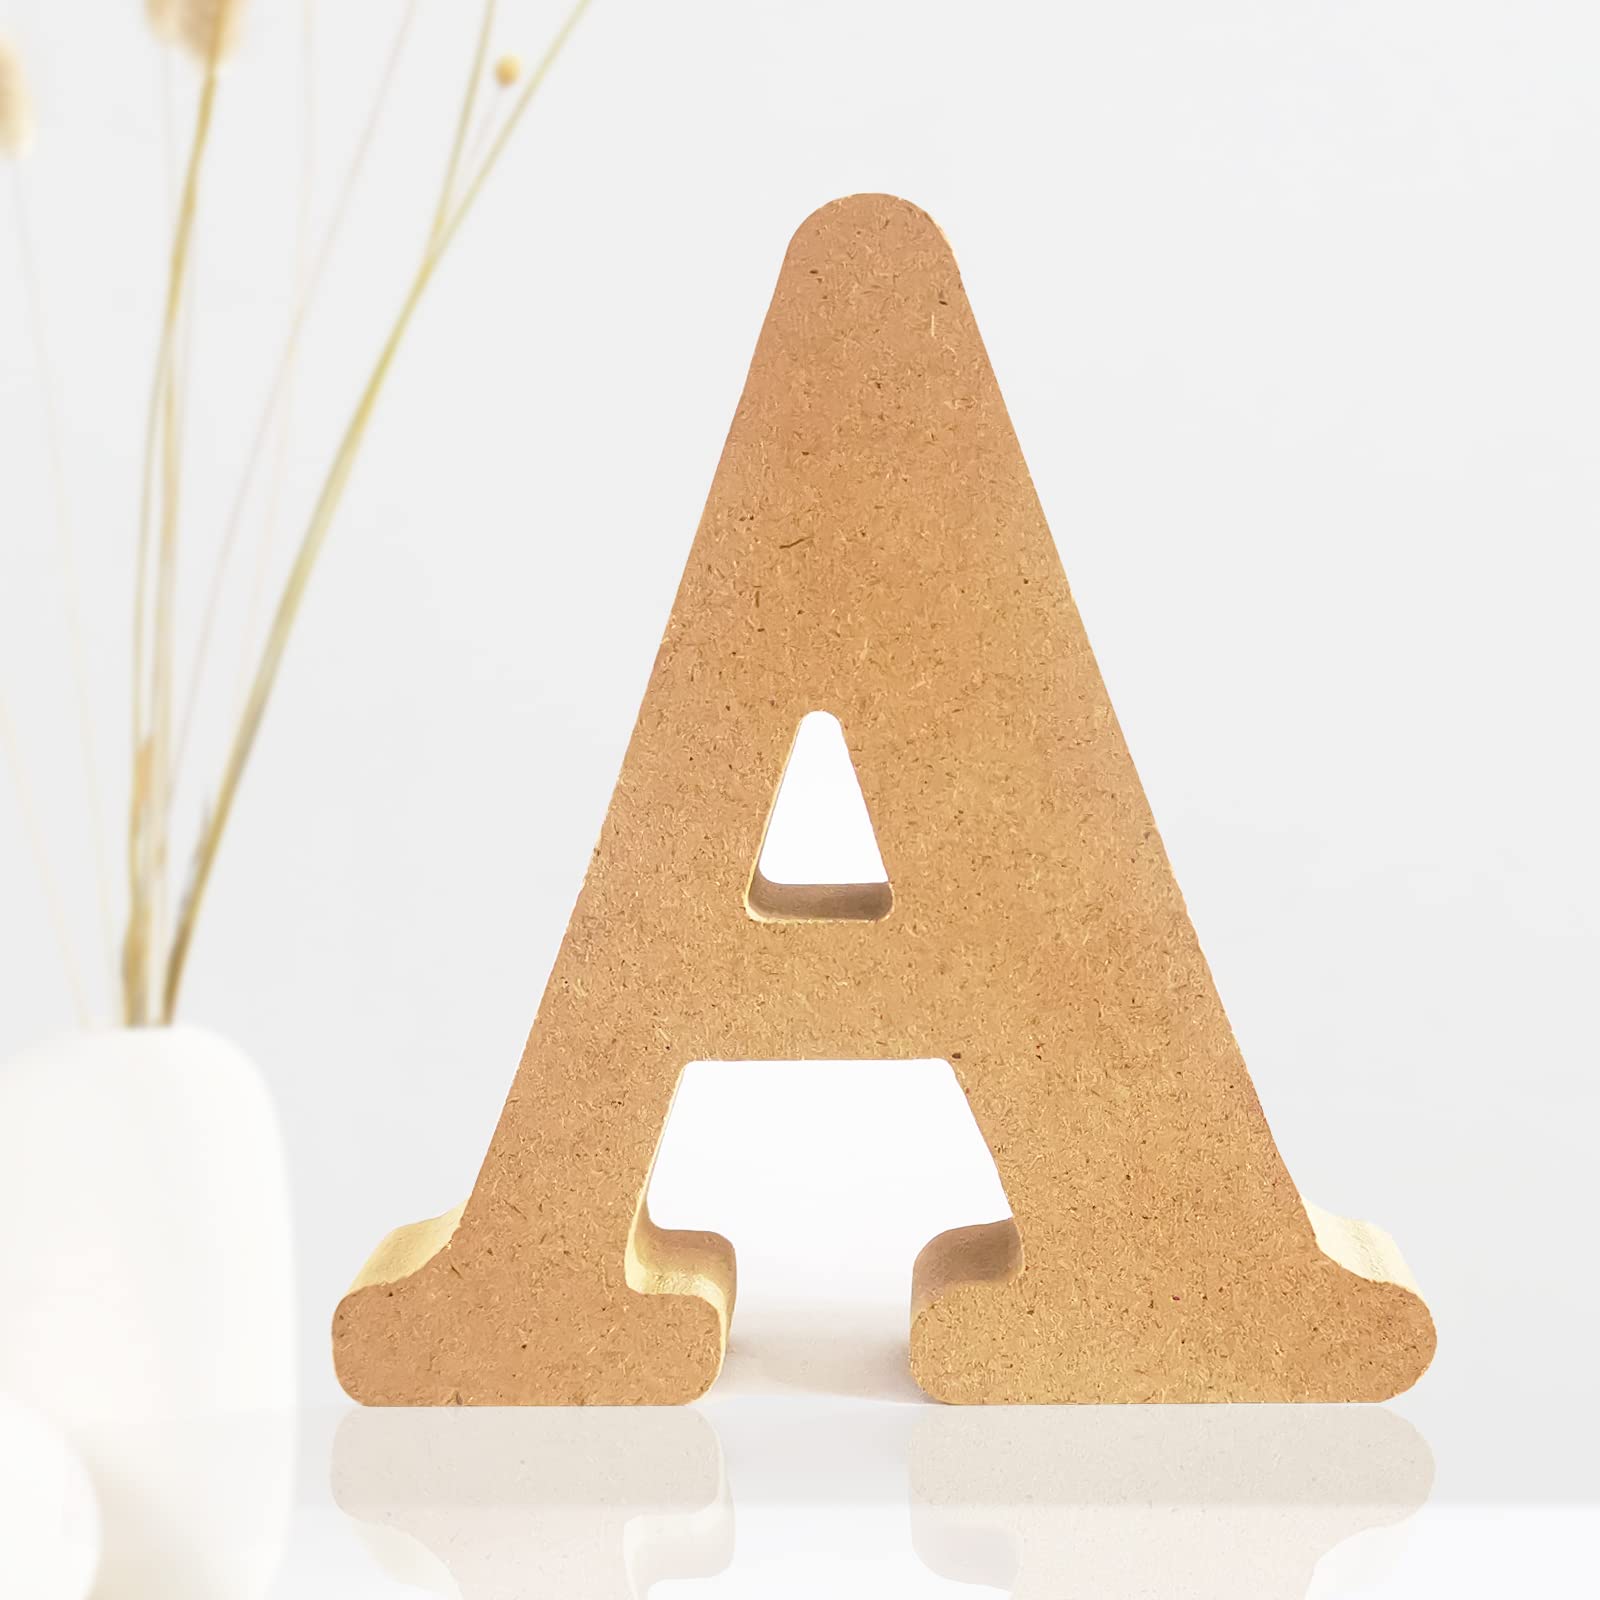 AOCEAN 4 inch White Wood Letters Unfinished Wood Letters for Wall Decor Decorative Standing Letters Slices Sign Board Decoration for Craft Home